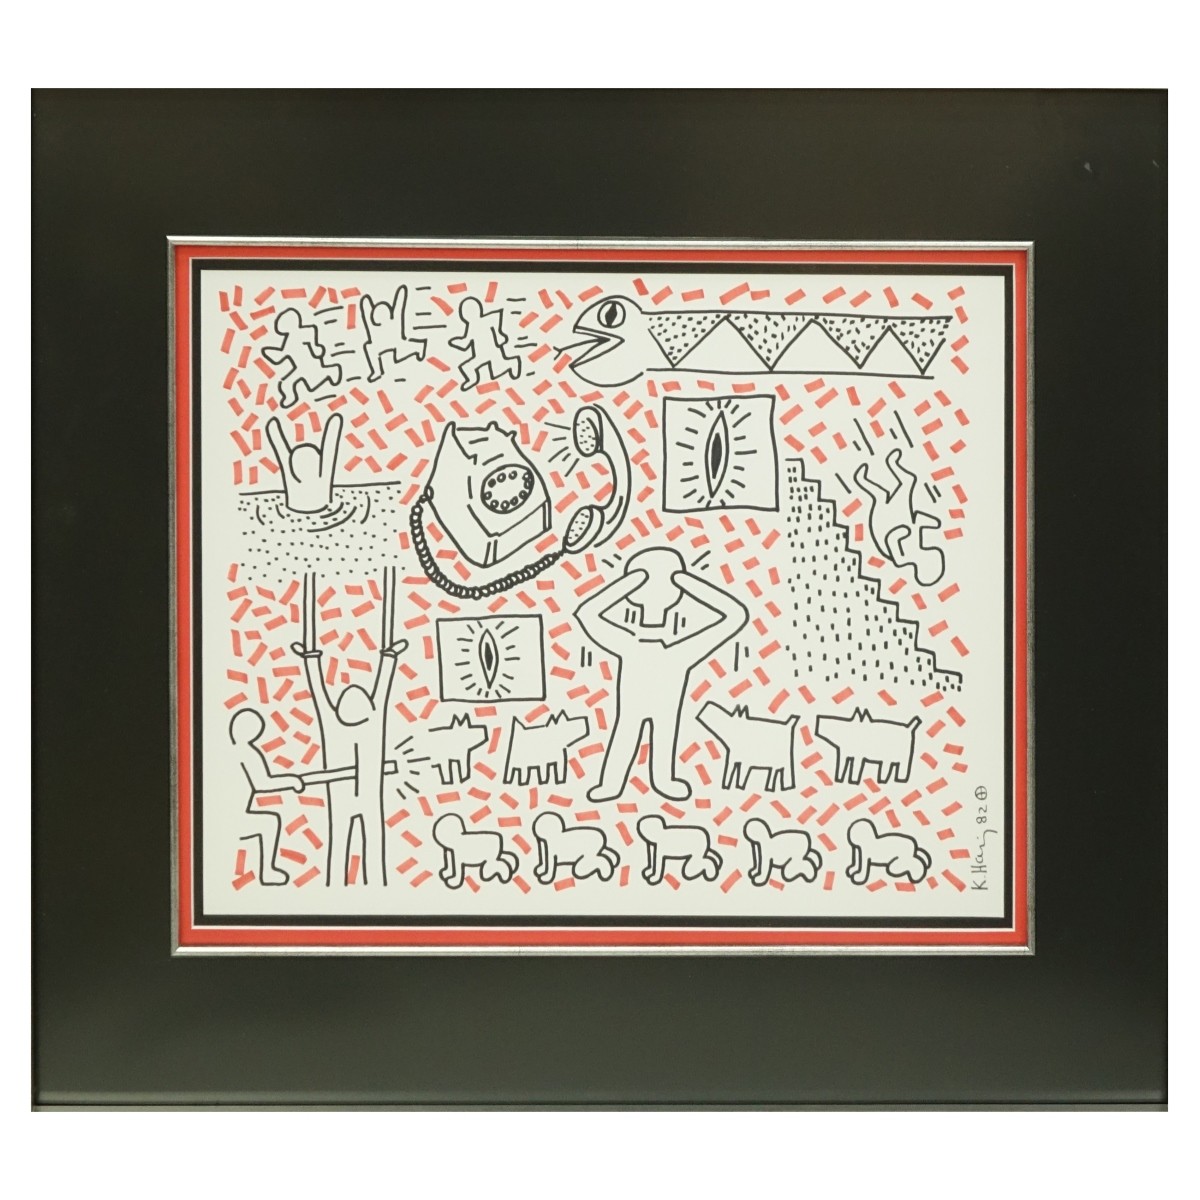 After: Keith Haring, American (1958-1990)